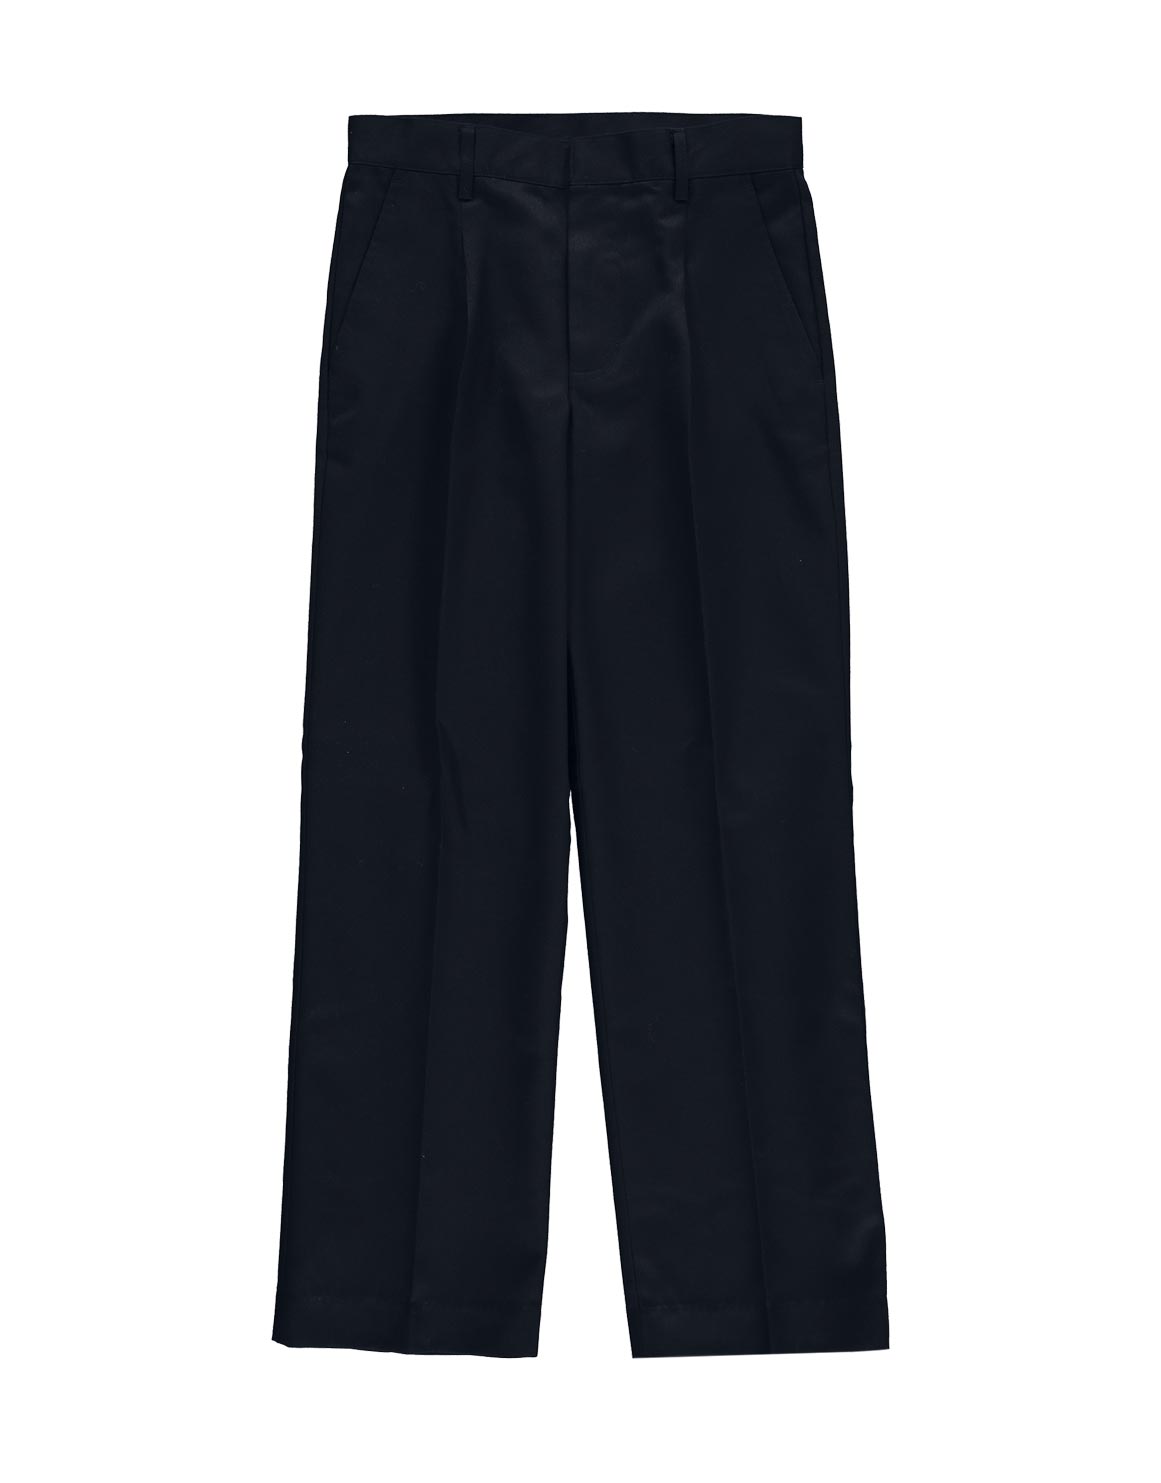 Top more than 53 girls navy blue school trousers - in.duhocakina